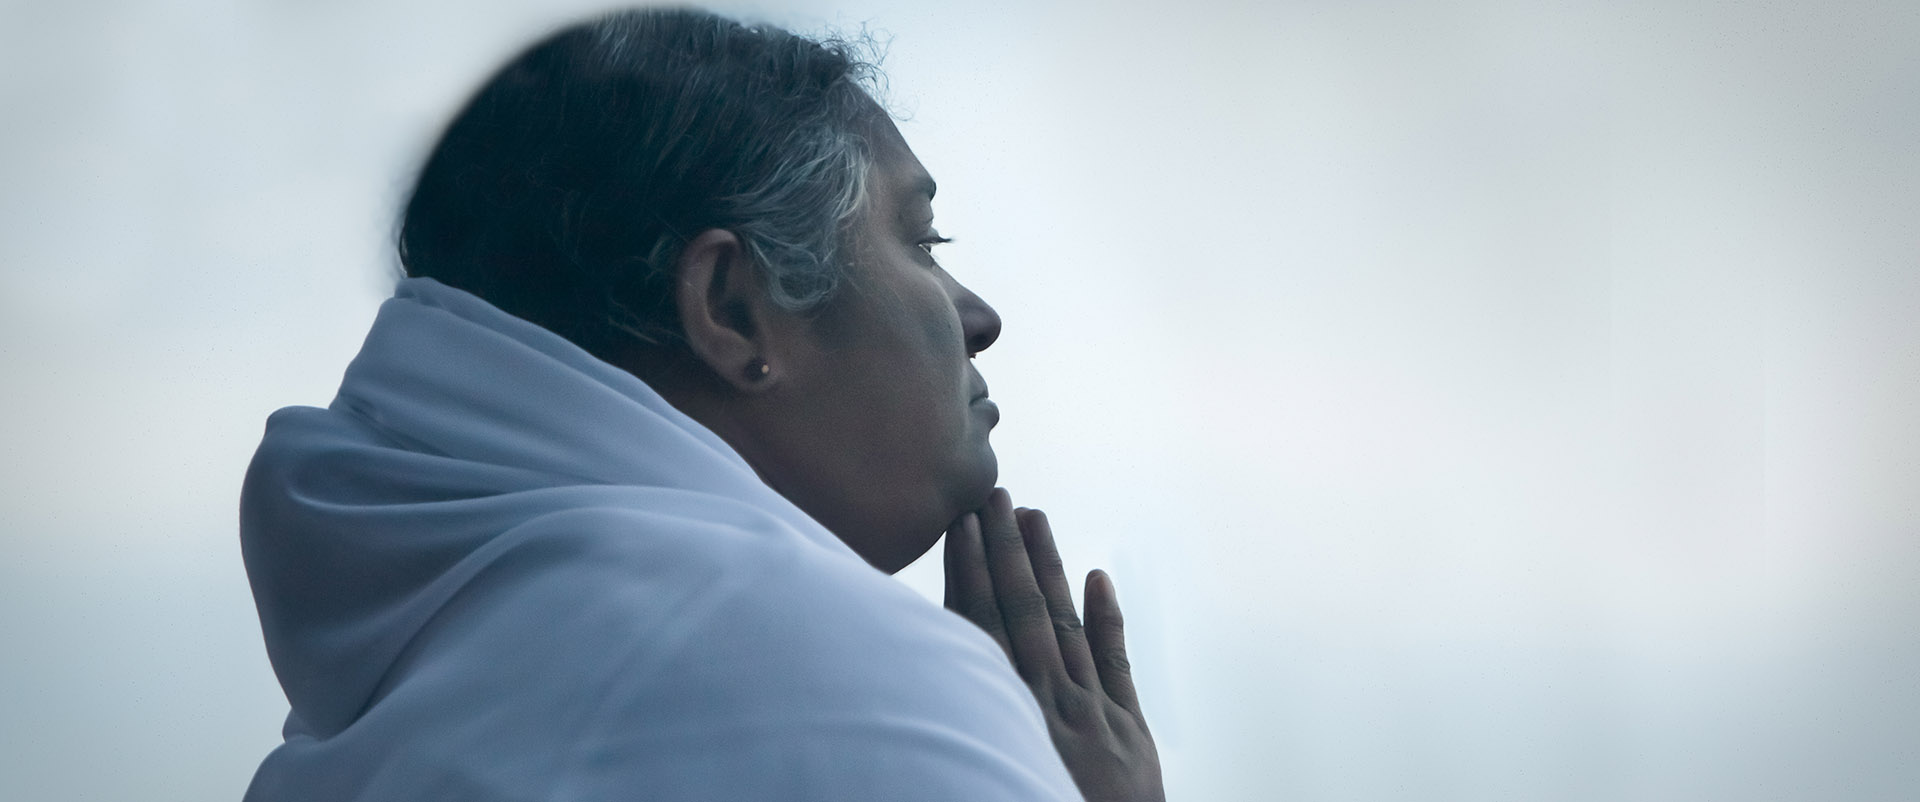 Amma with her hands in prayer